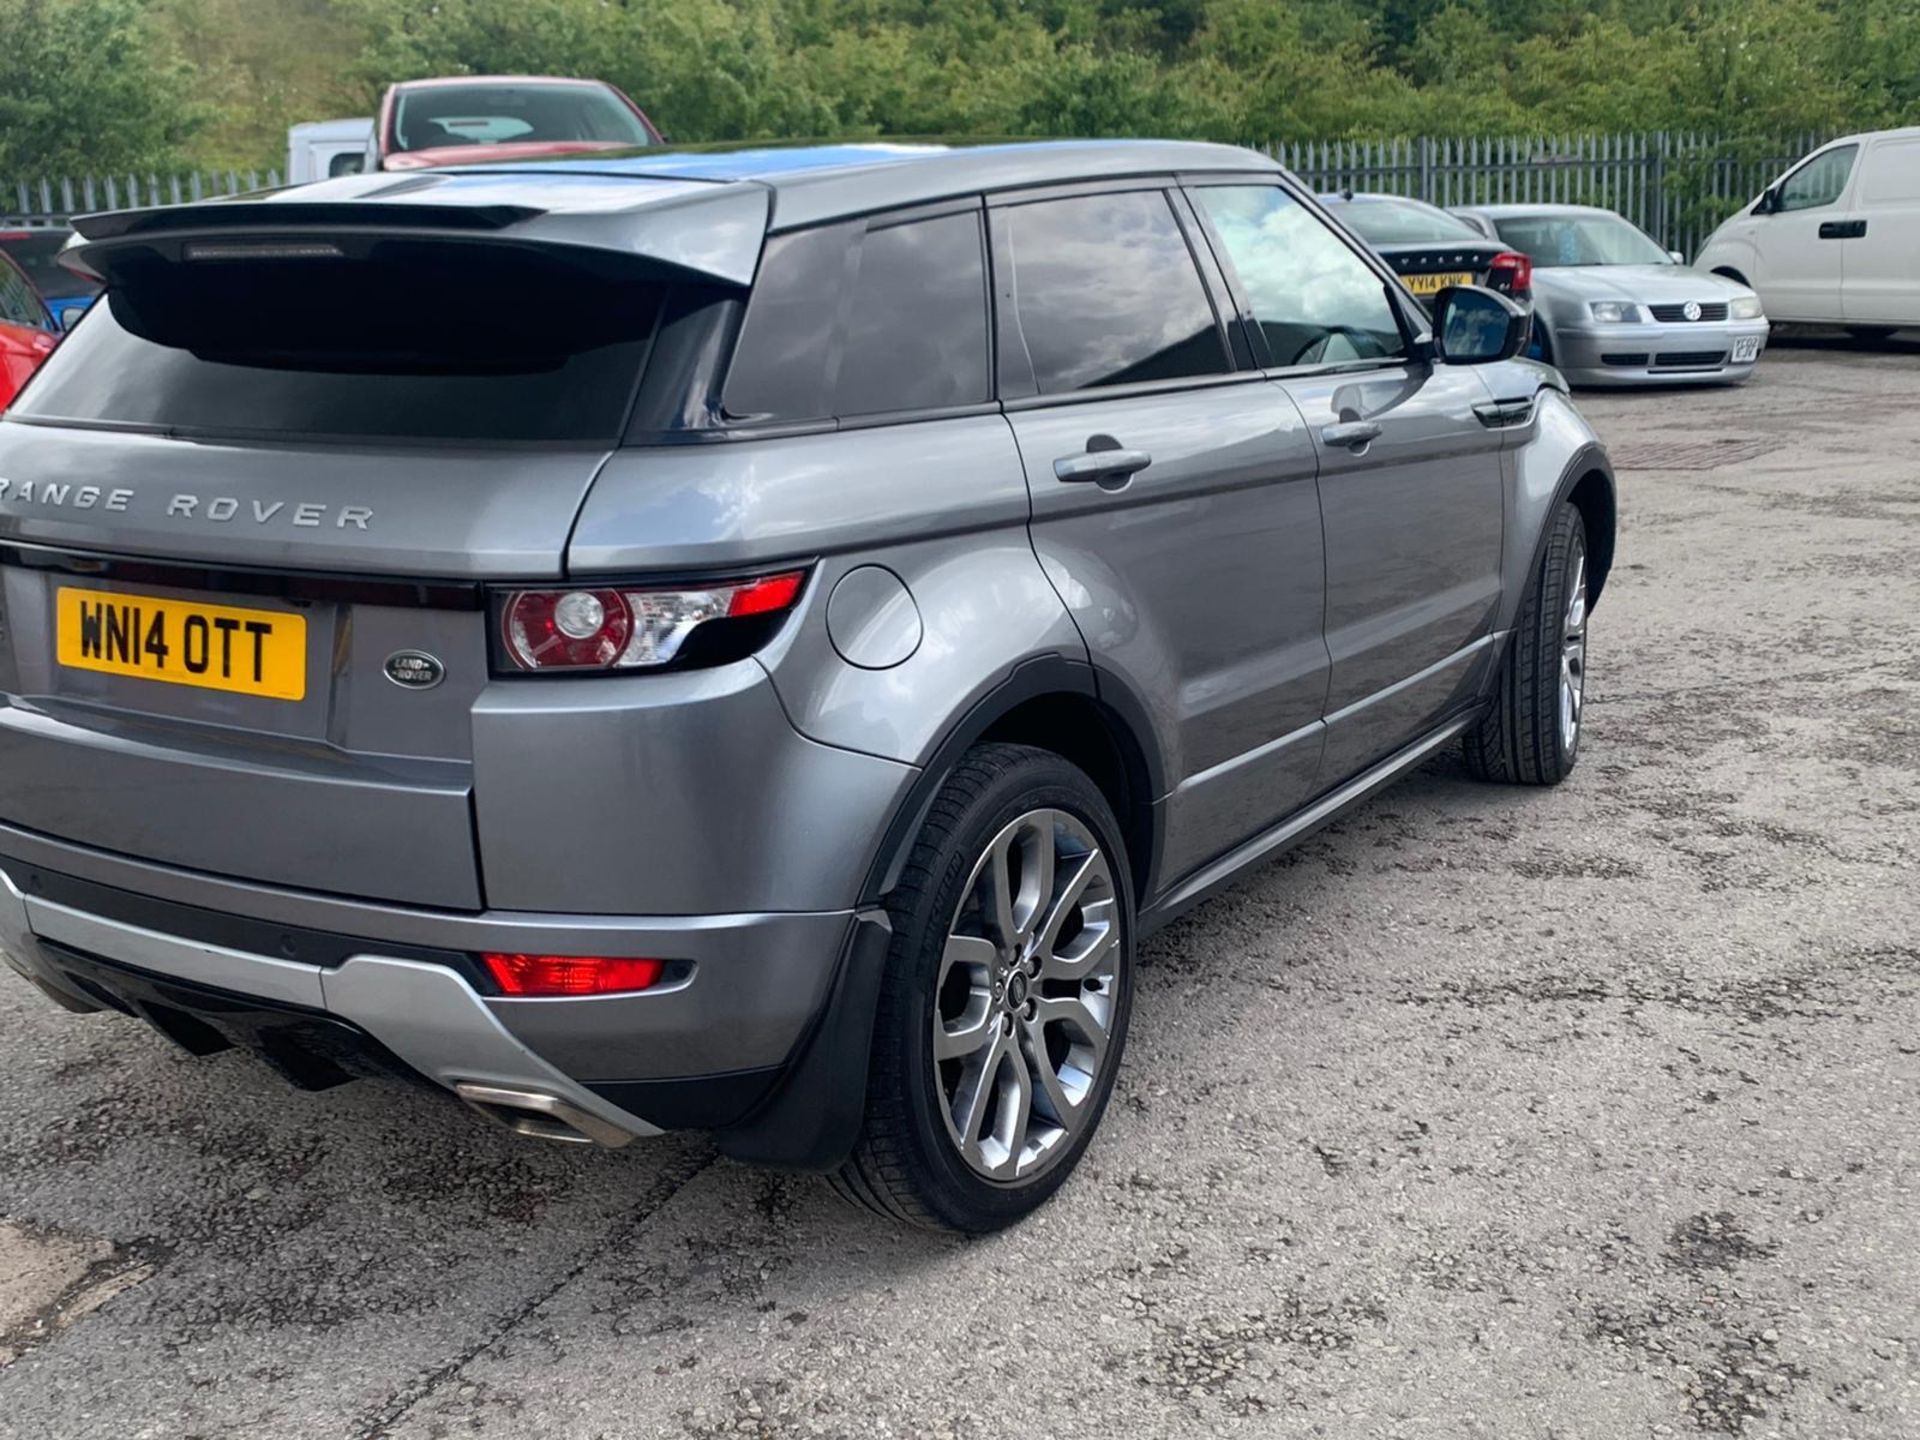 2014/14 REG LAND ROVER RANGE ROVER EVOQUE DYNAMIC S 2.2 DIESEL GREY, SHOWING 2 FORMER KEEPERS - Image 6 of 13